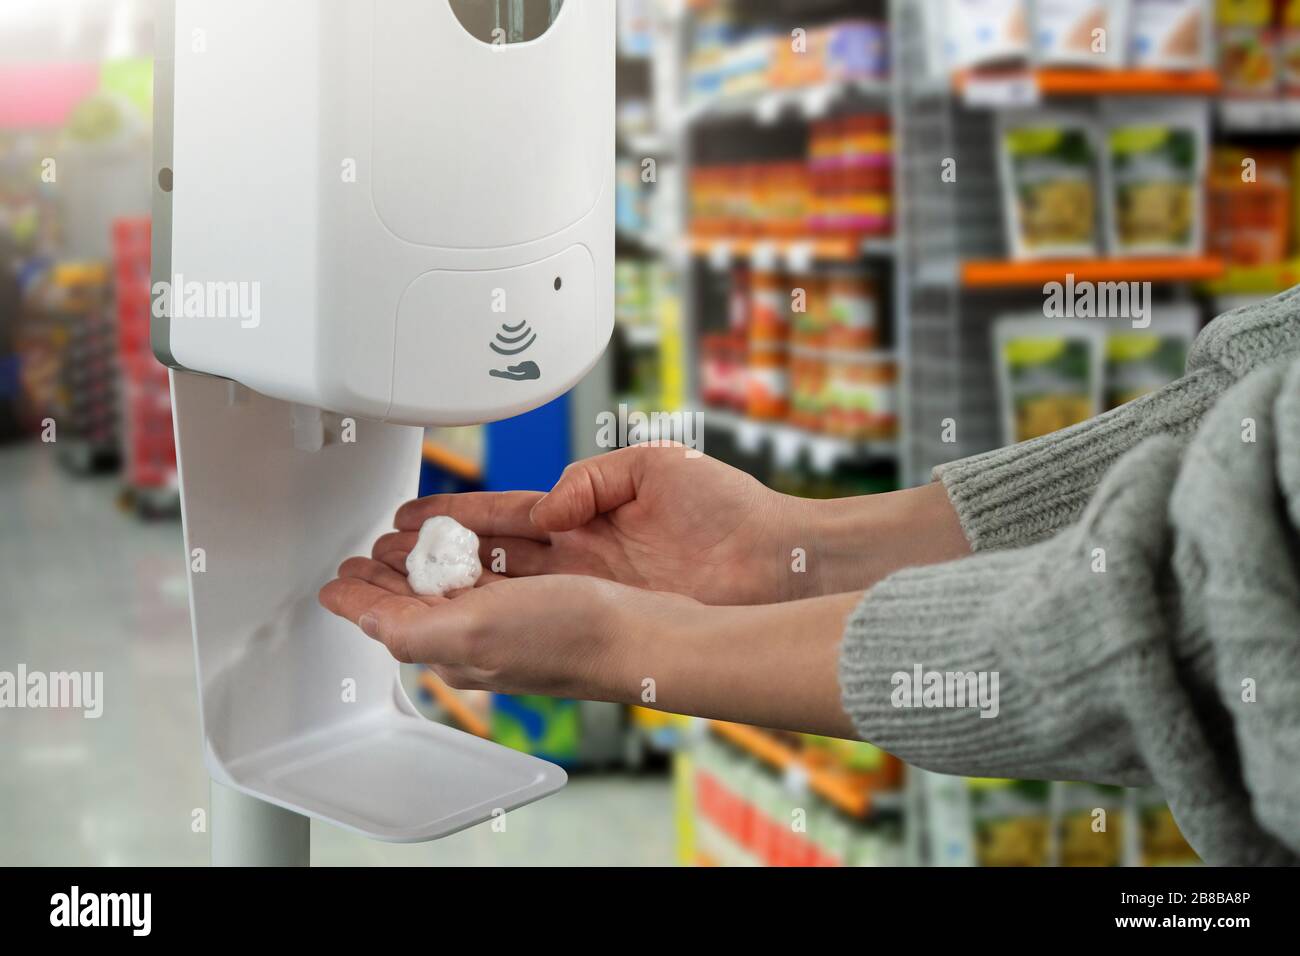 Woman treats her hands with a disinfectant in a food store during the coronavirus epidemic Stock Photo